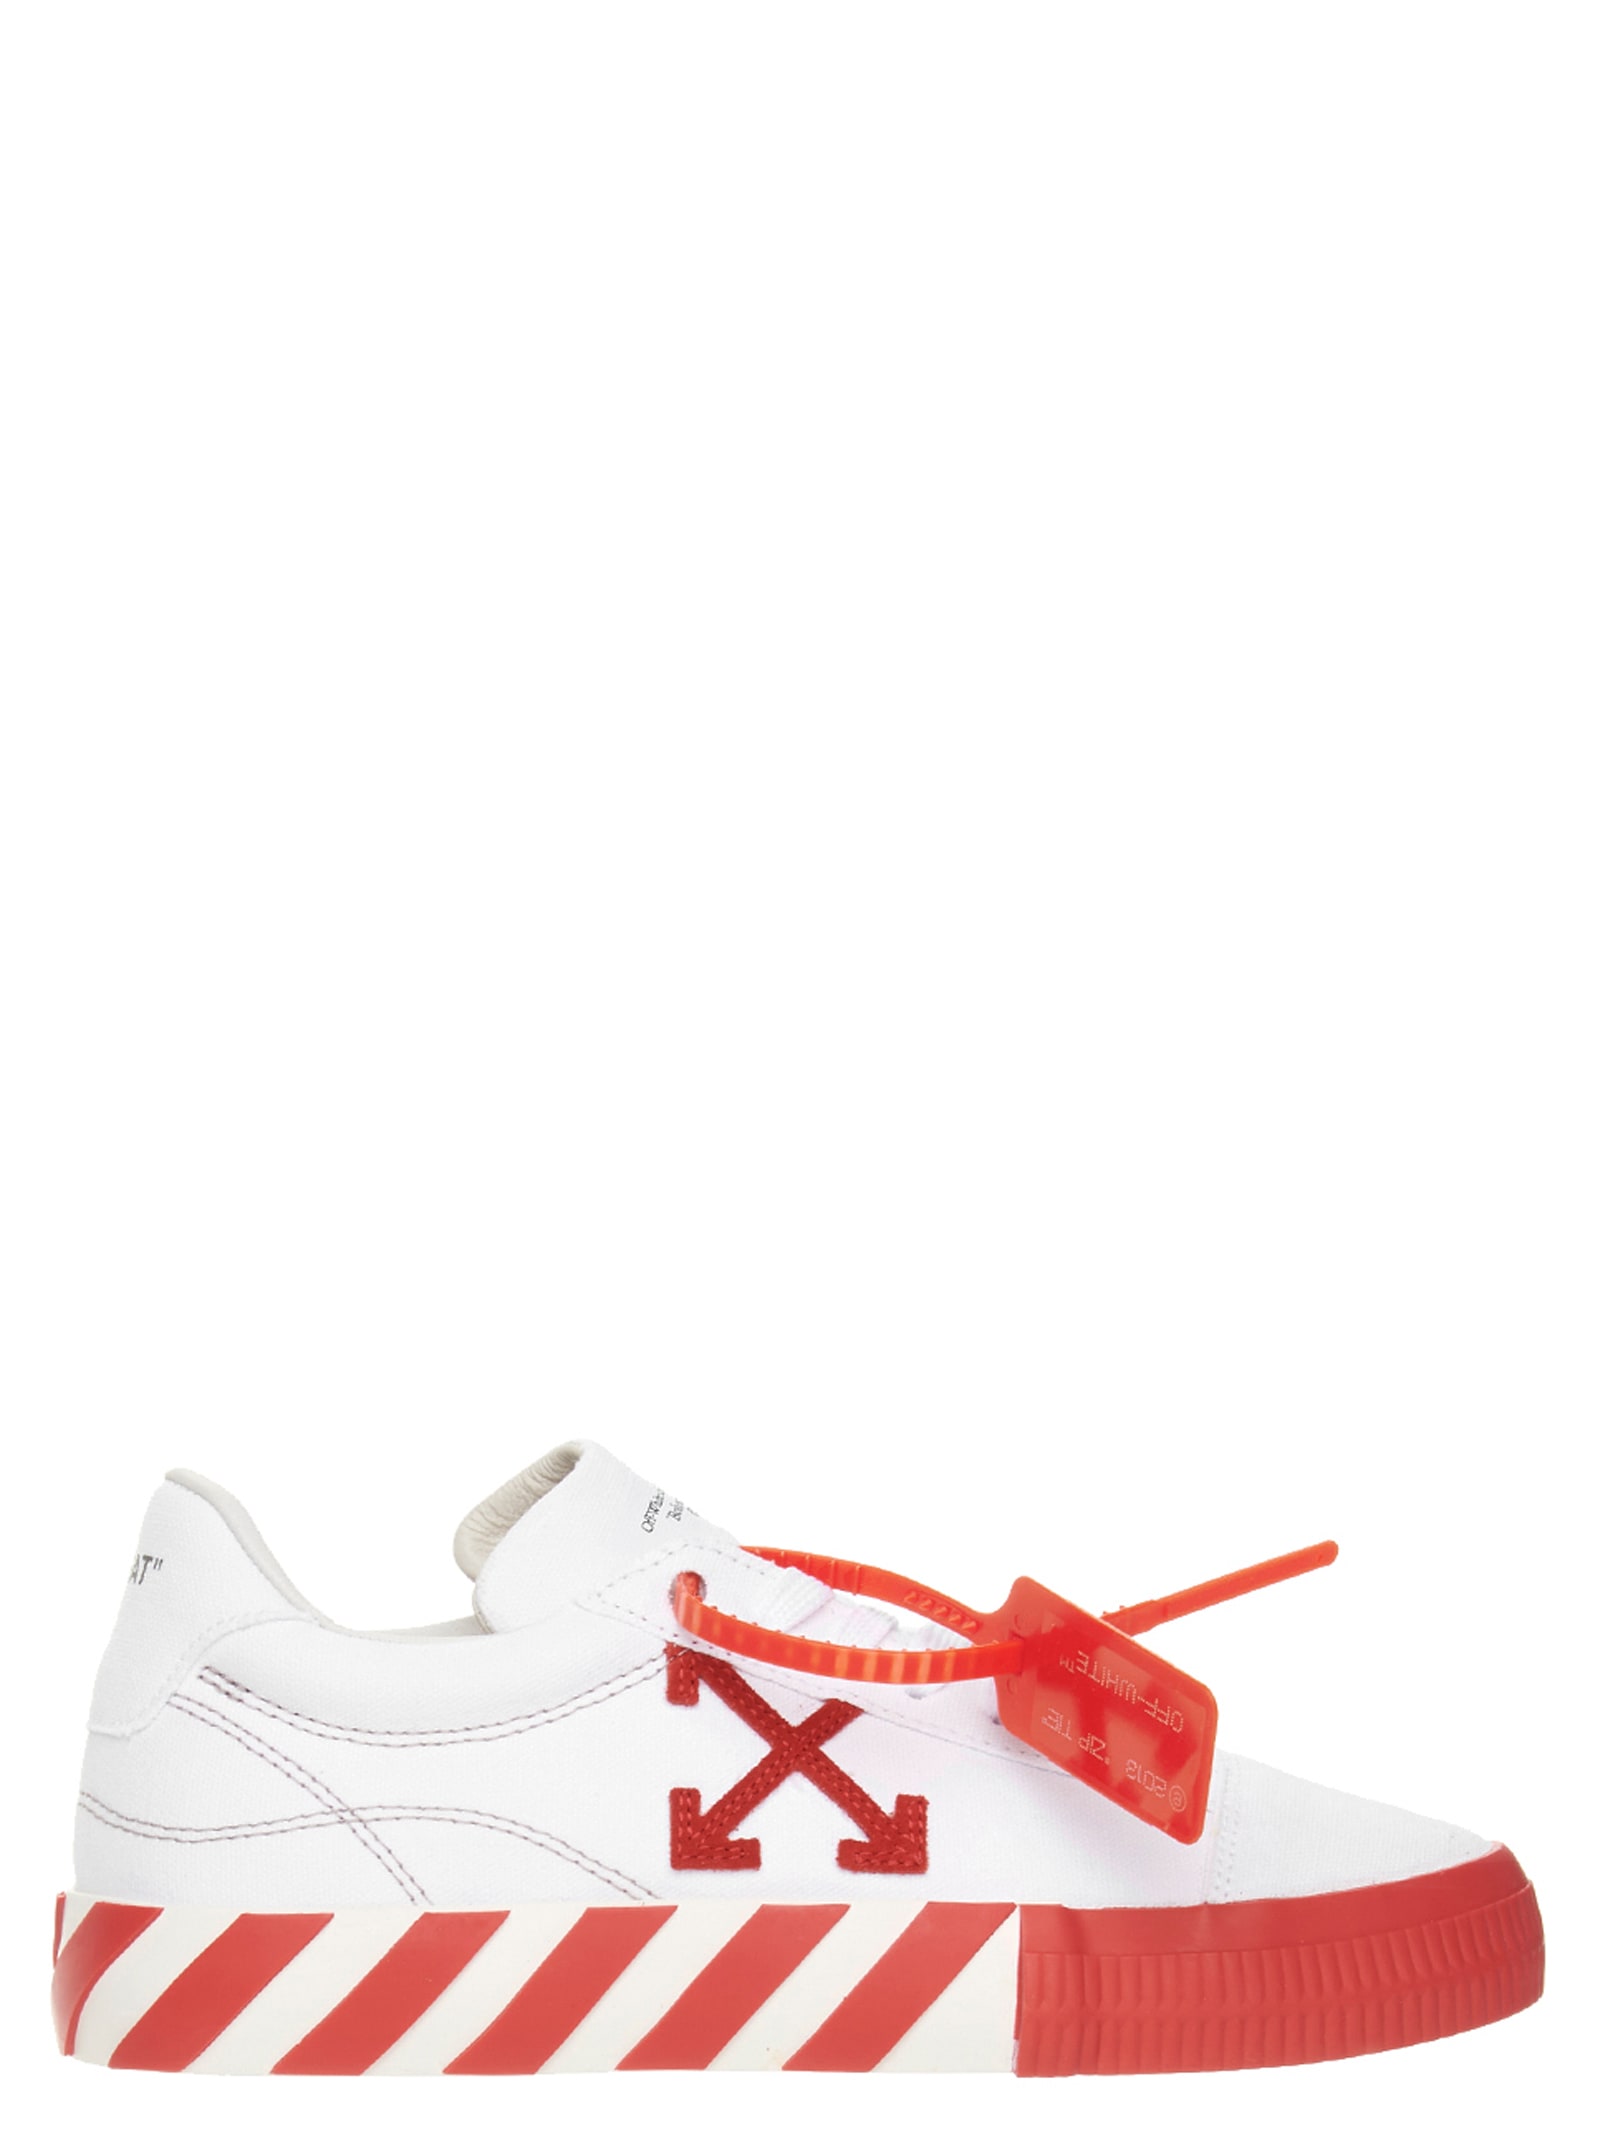 Off-white canvas Low Vulcanized Shoes